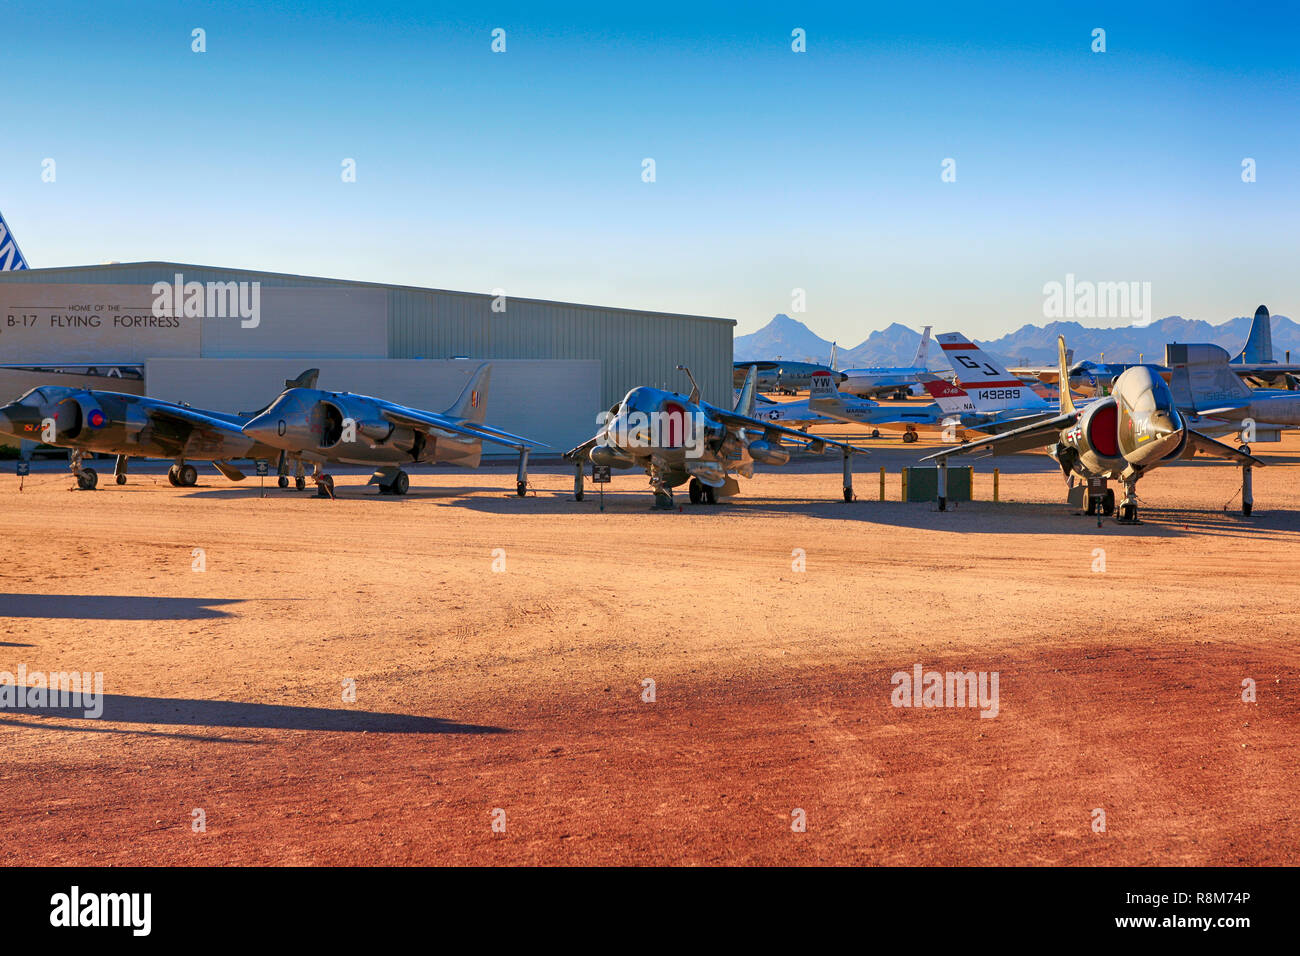 Collection of Hawker Siddeley VSTOL fighter planes on display at the Pima Air & Space Museum in Tucson, AZ Stock Photo